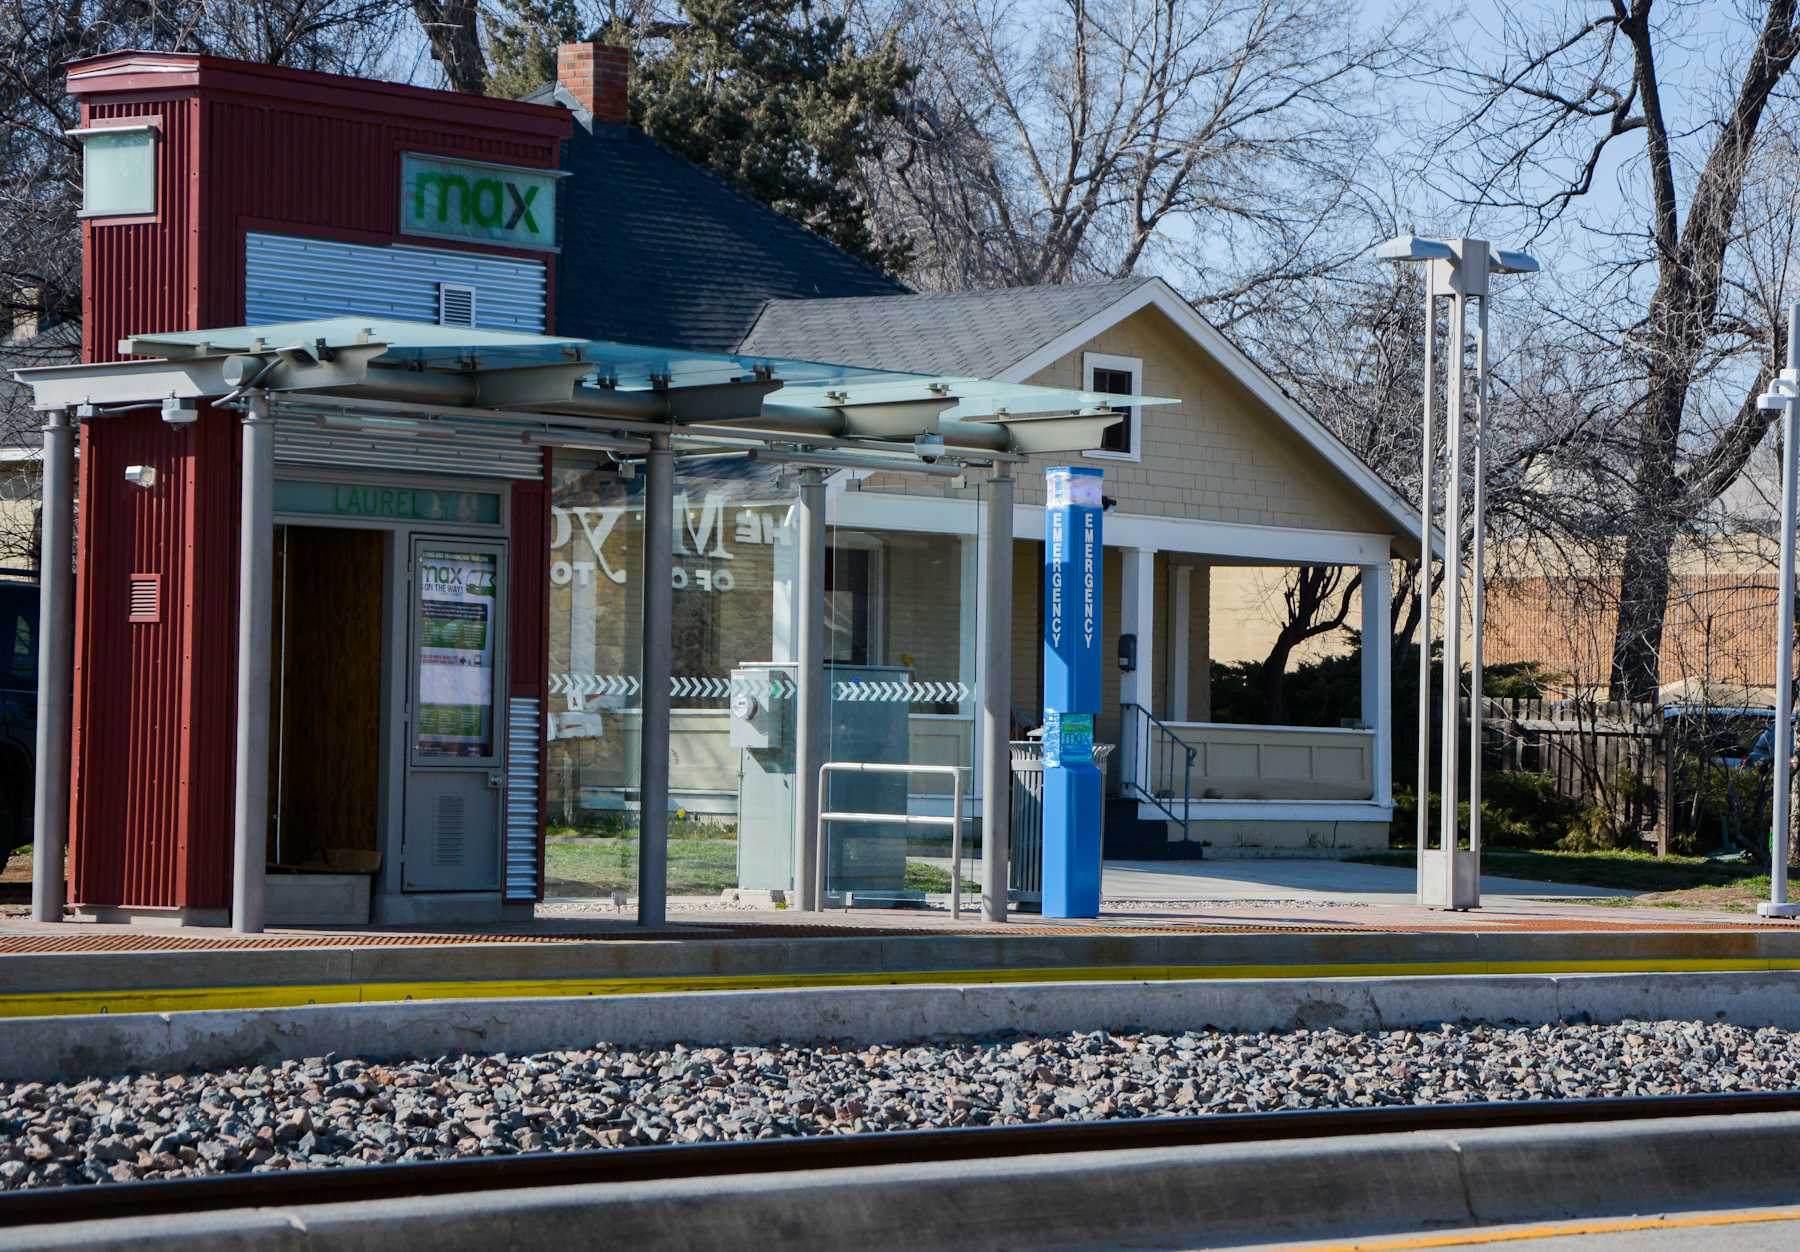 The MAX bus stations are popping up all along Mason Street thoughout Fort Collins. The system is currently undergoing testing and training before finally being installed.